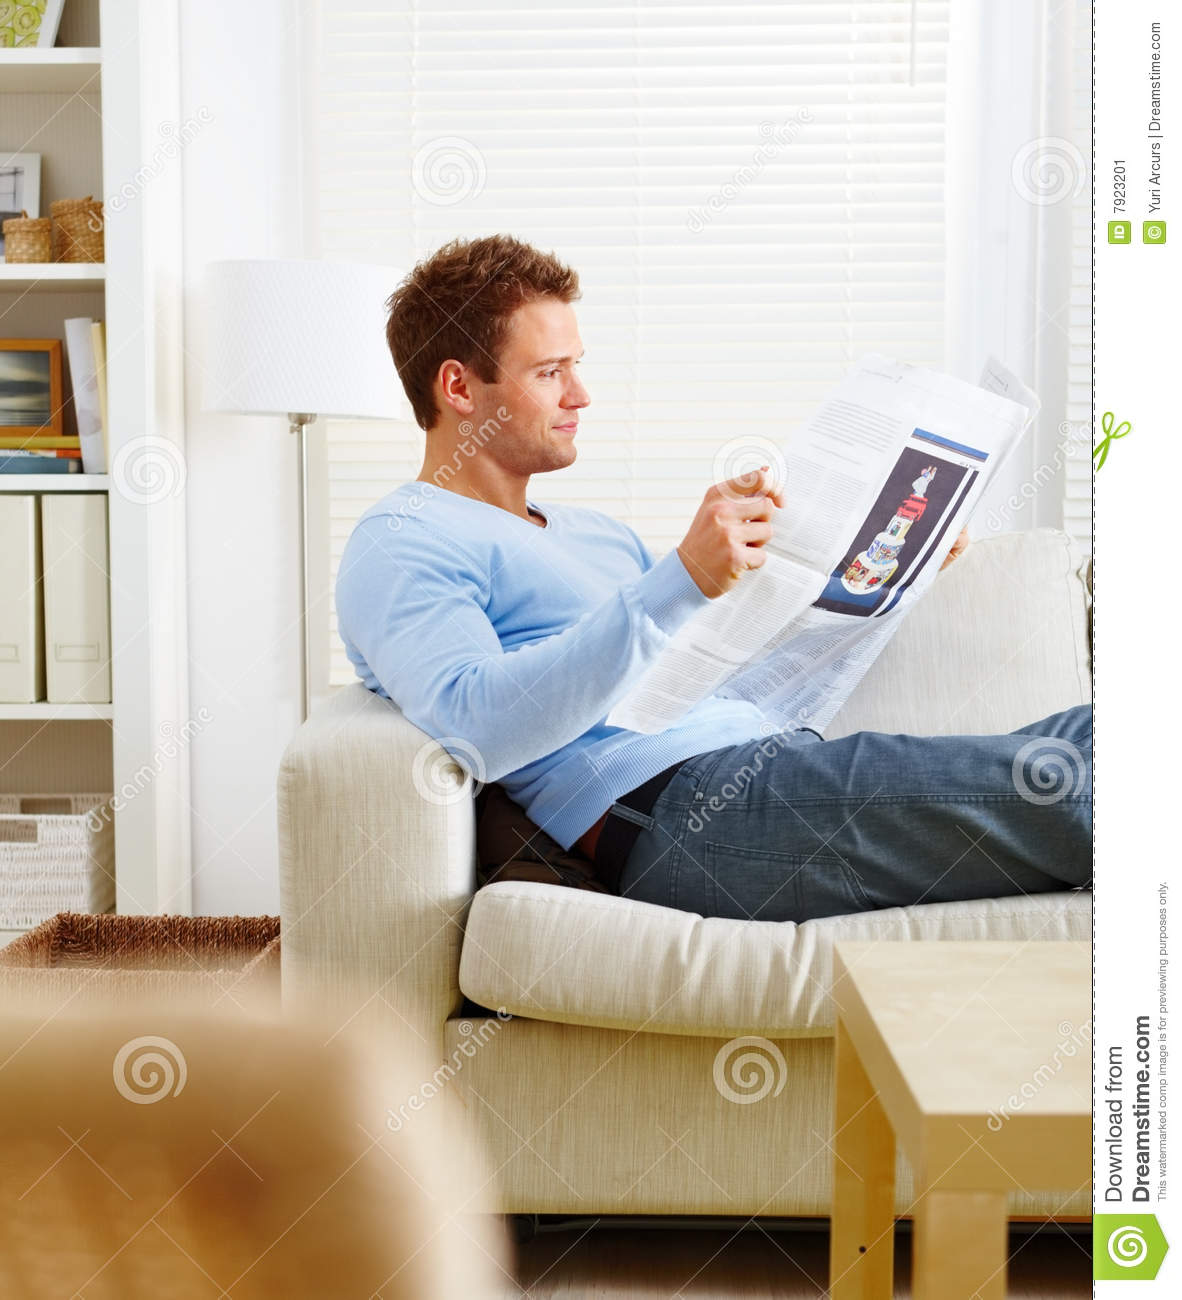 Stock Image  Man Lying On Couch Reading Newspaper  Image  7923201